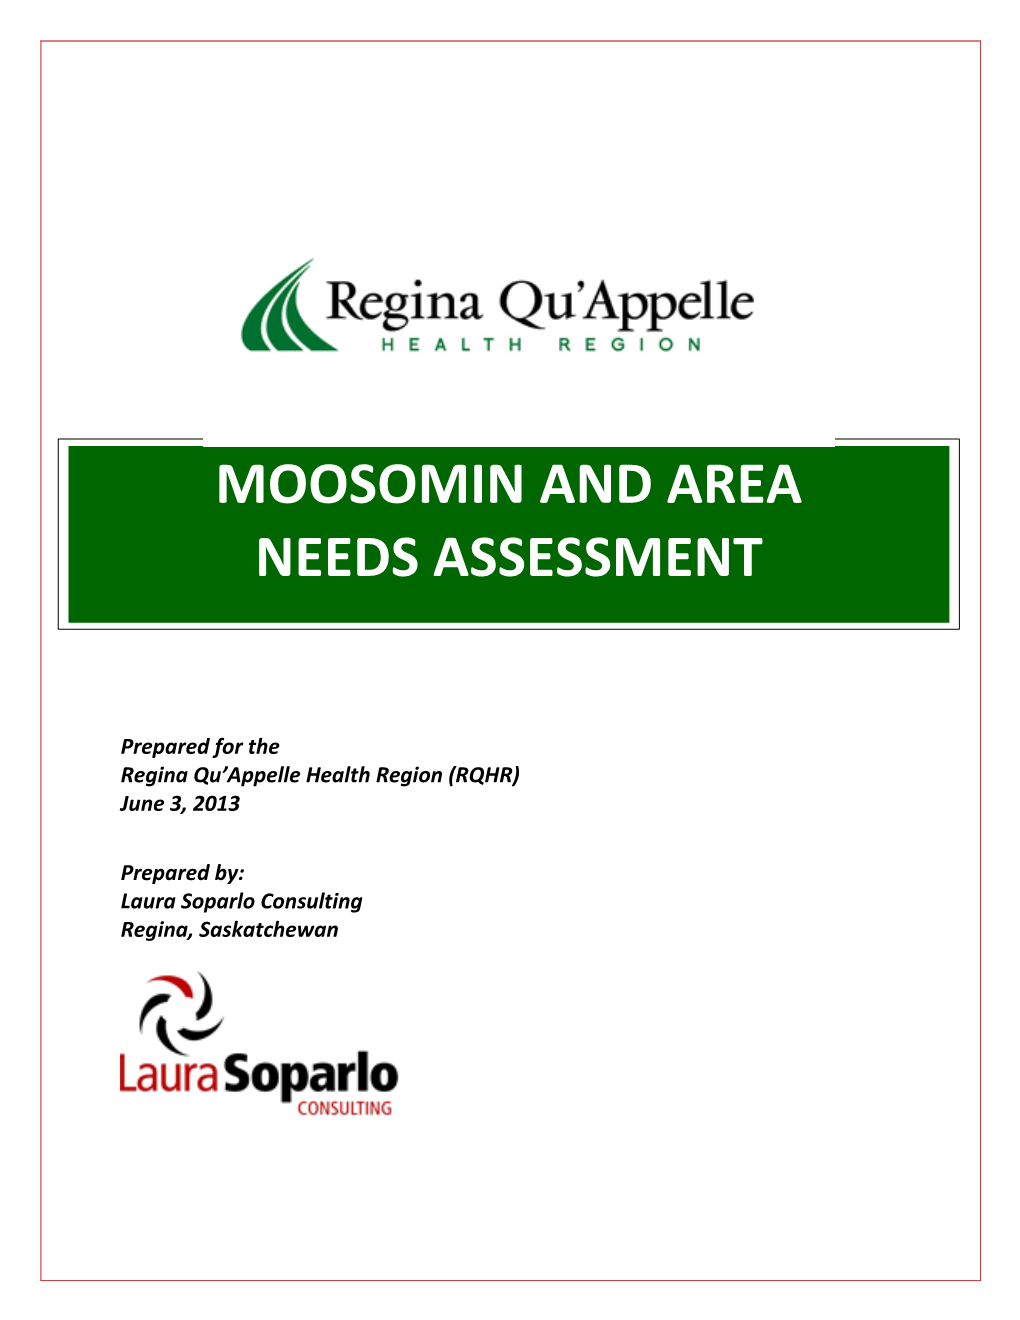 Moosomin and Area Needs Assessment